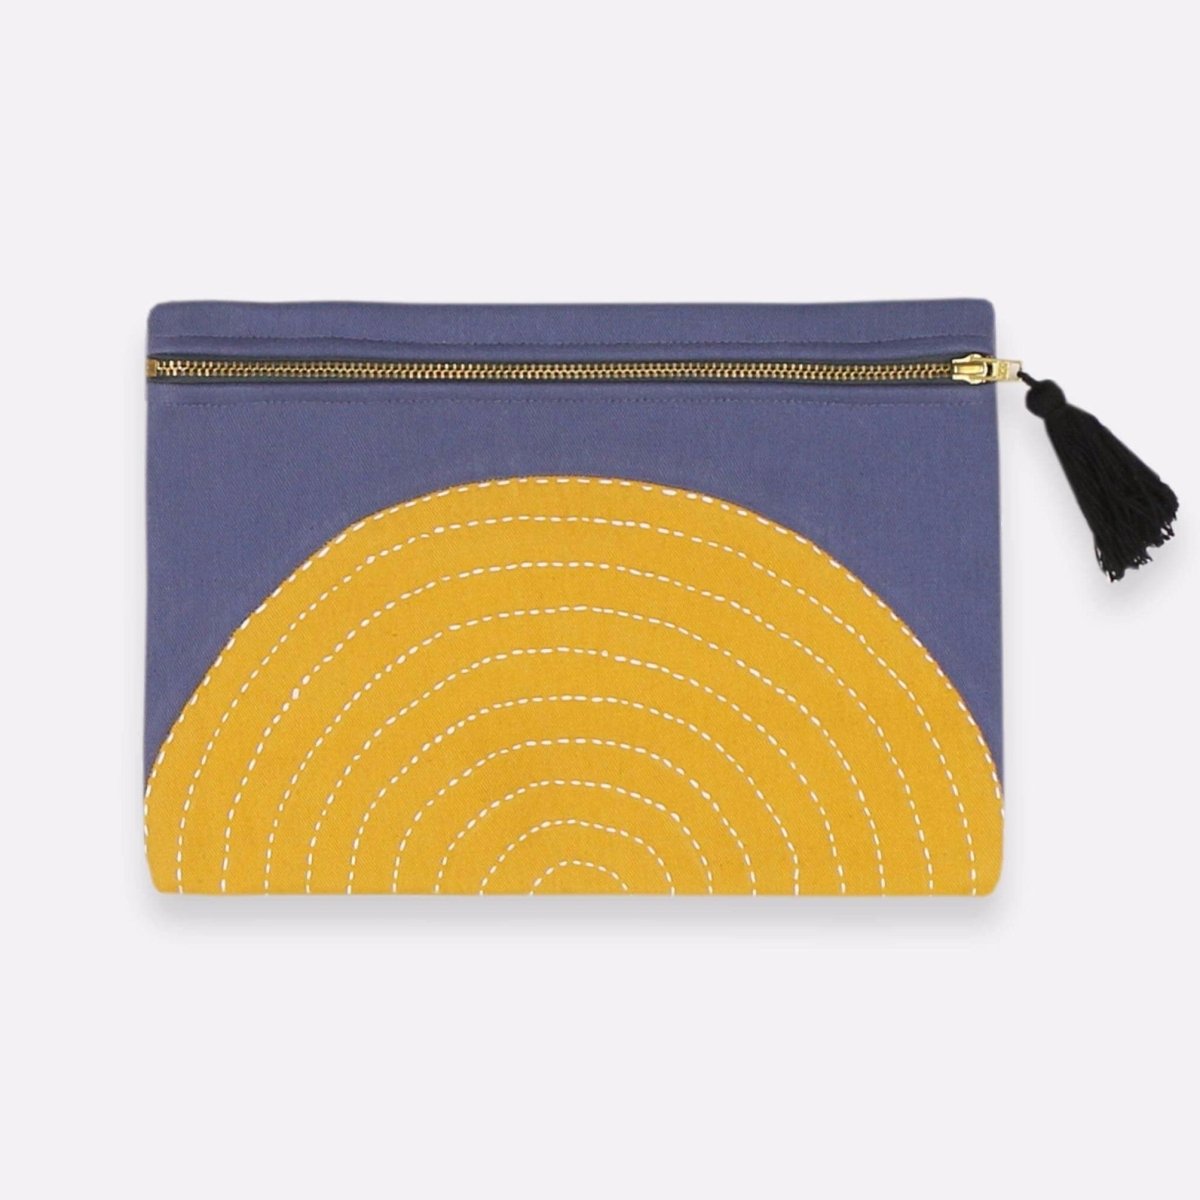 Slate colored square pouch with a yellow cross-stitched concentric pattern. Includes a zipper with a black tassel. Designed by Anchal in Louisville, Kentucky and handmade in Ajmer, India.